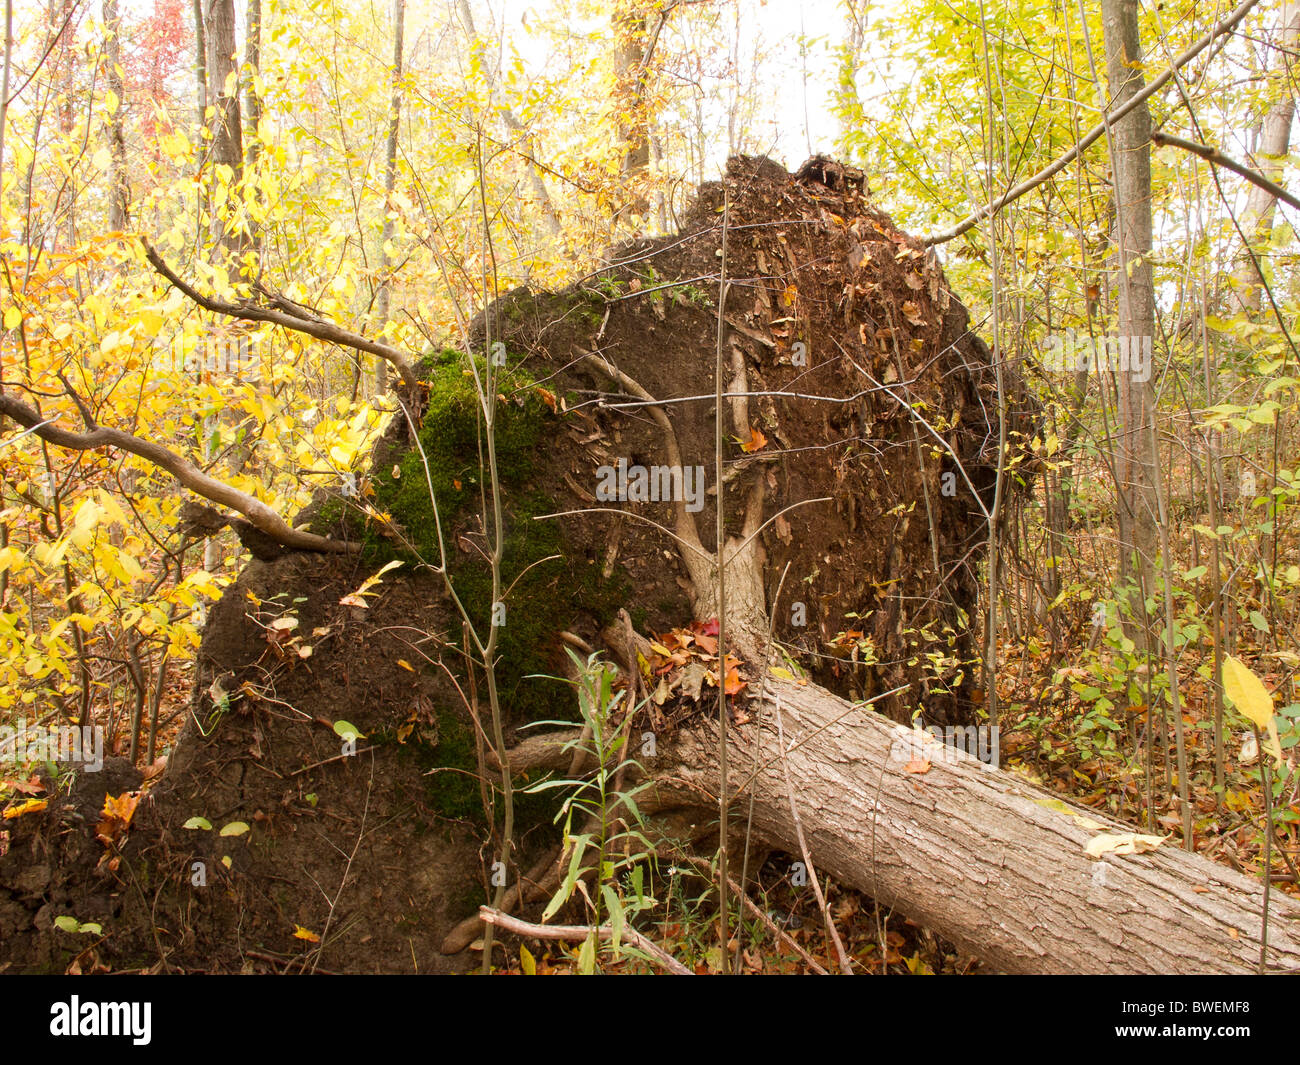 Uprooted tree. Stock Photo